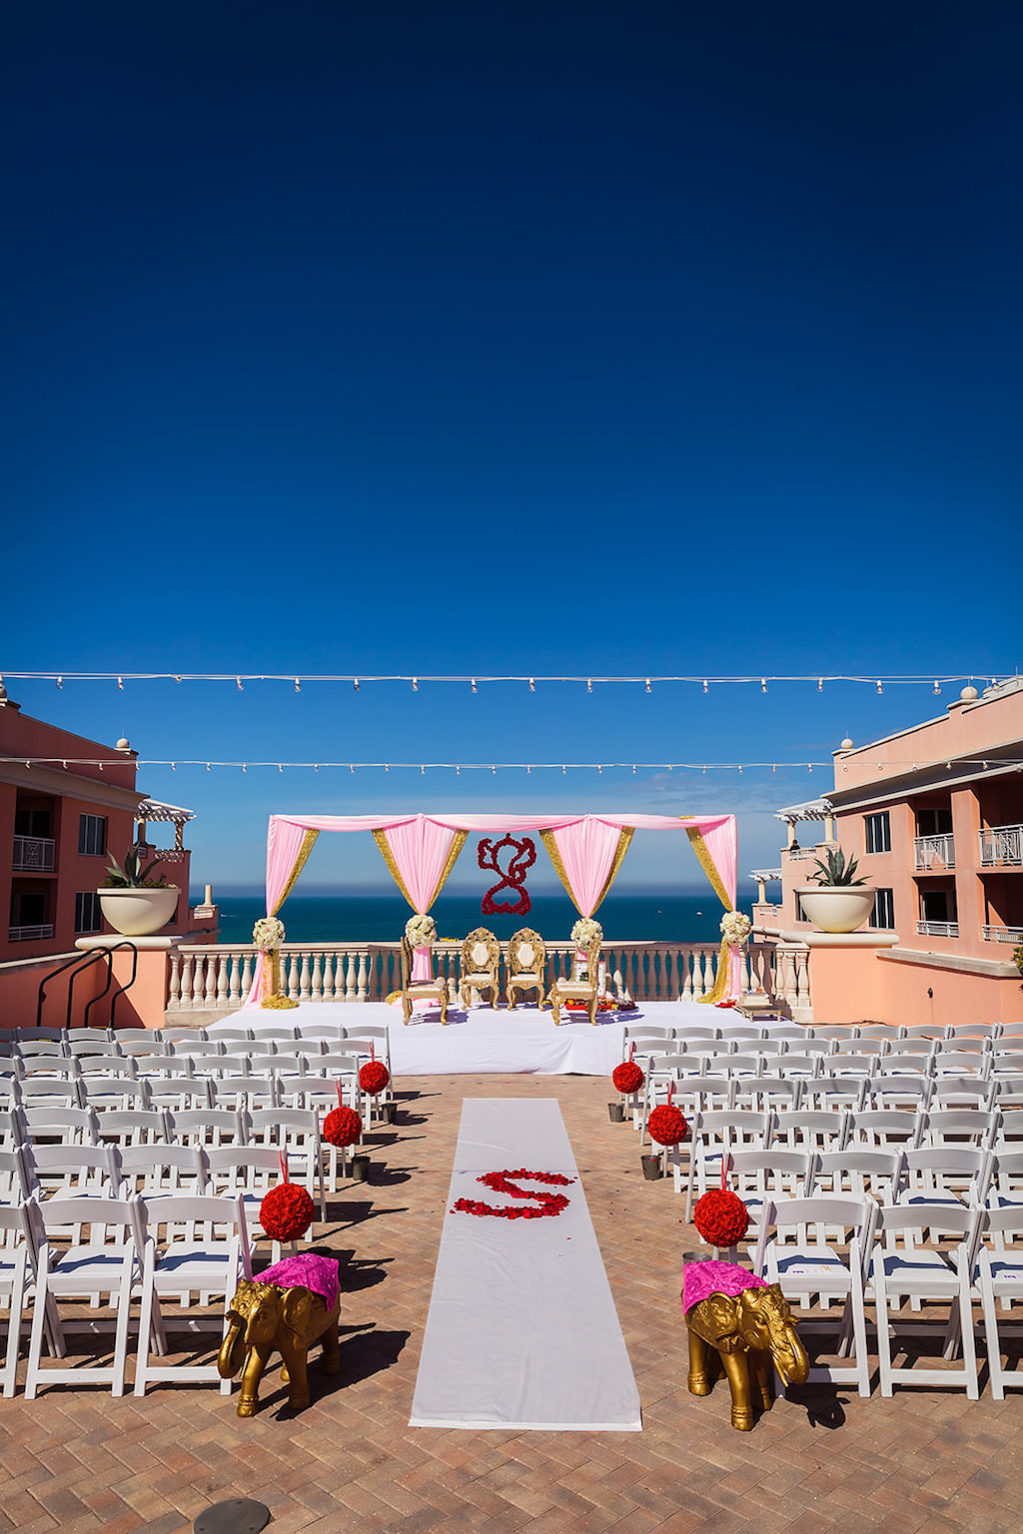 Florida Indian Hindu Rooftop Wedding Ceremony Decor, Gold Elephant Statues, White Folding Chairs, Red Floral Pom Poms, Pink and Gold Linen Drapery Arch, White Aisle Runner with Personalized Red Rose Petals and String Lights | Clearwater Beach Waterfront Wedding Venue Hyatt Regency Clearwater